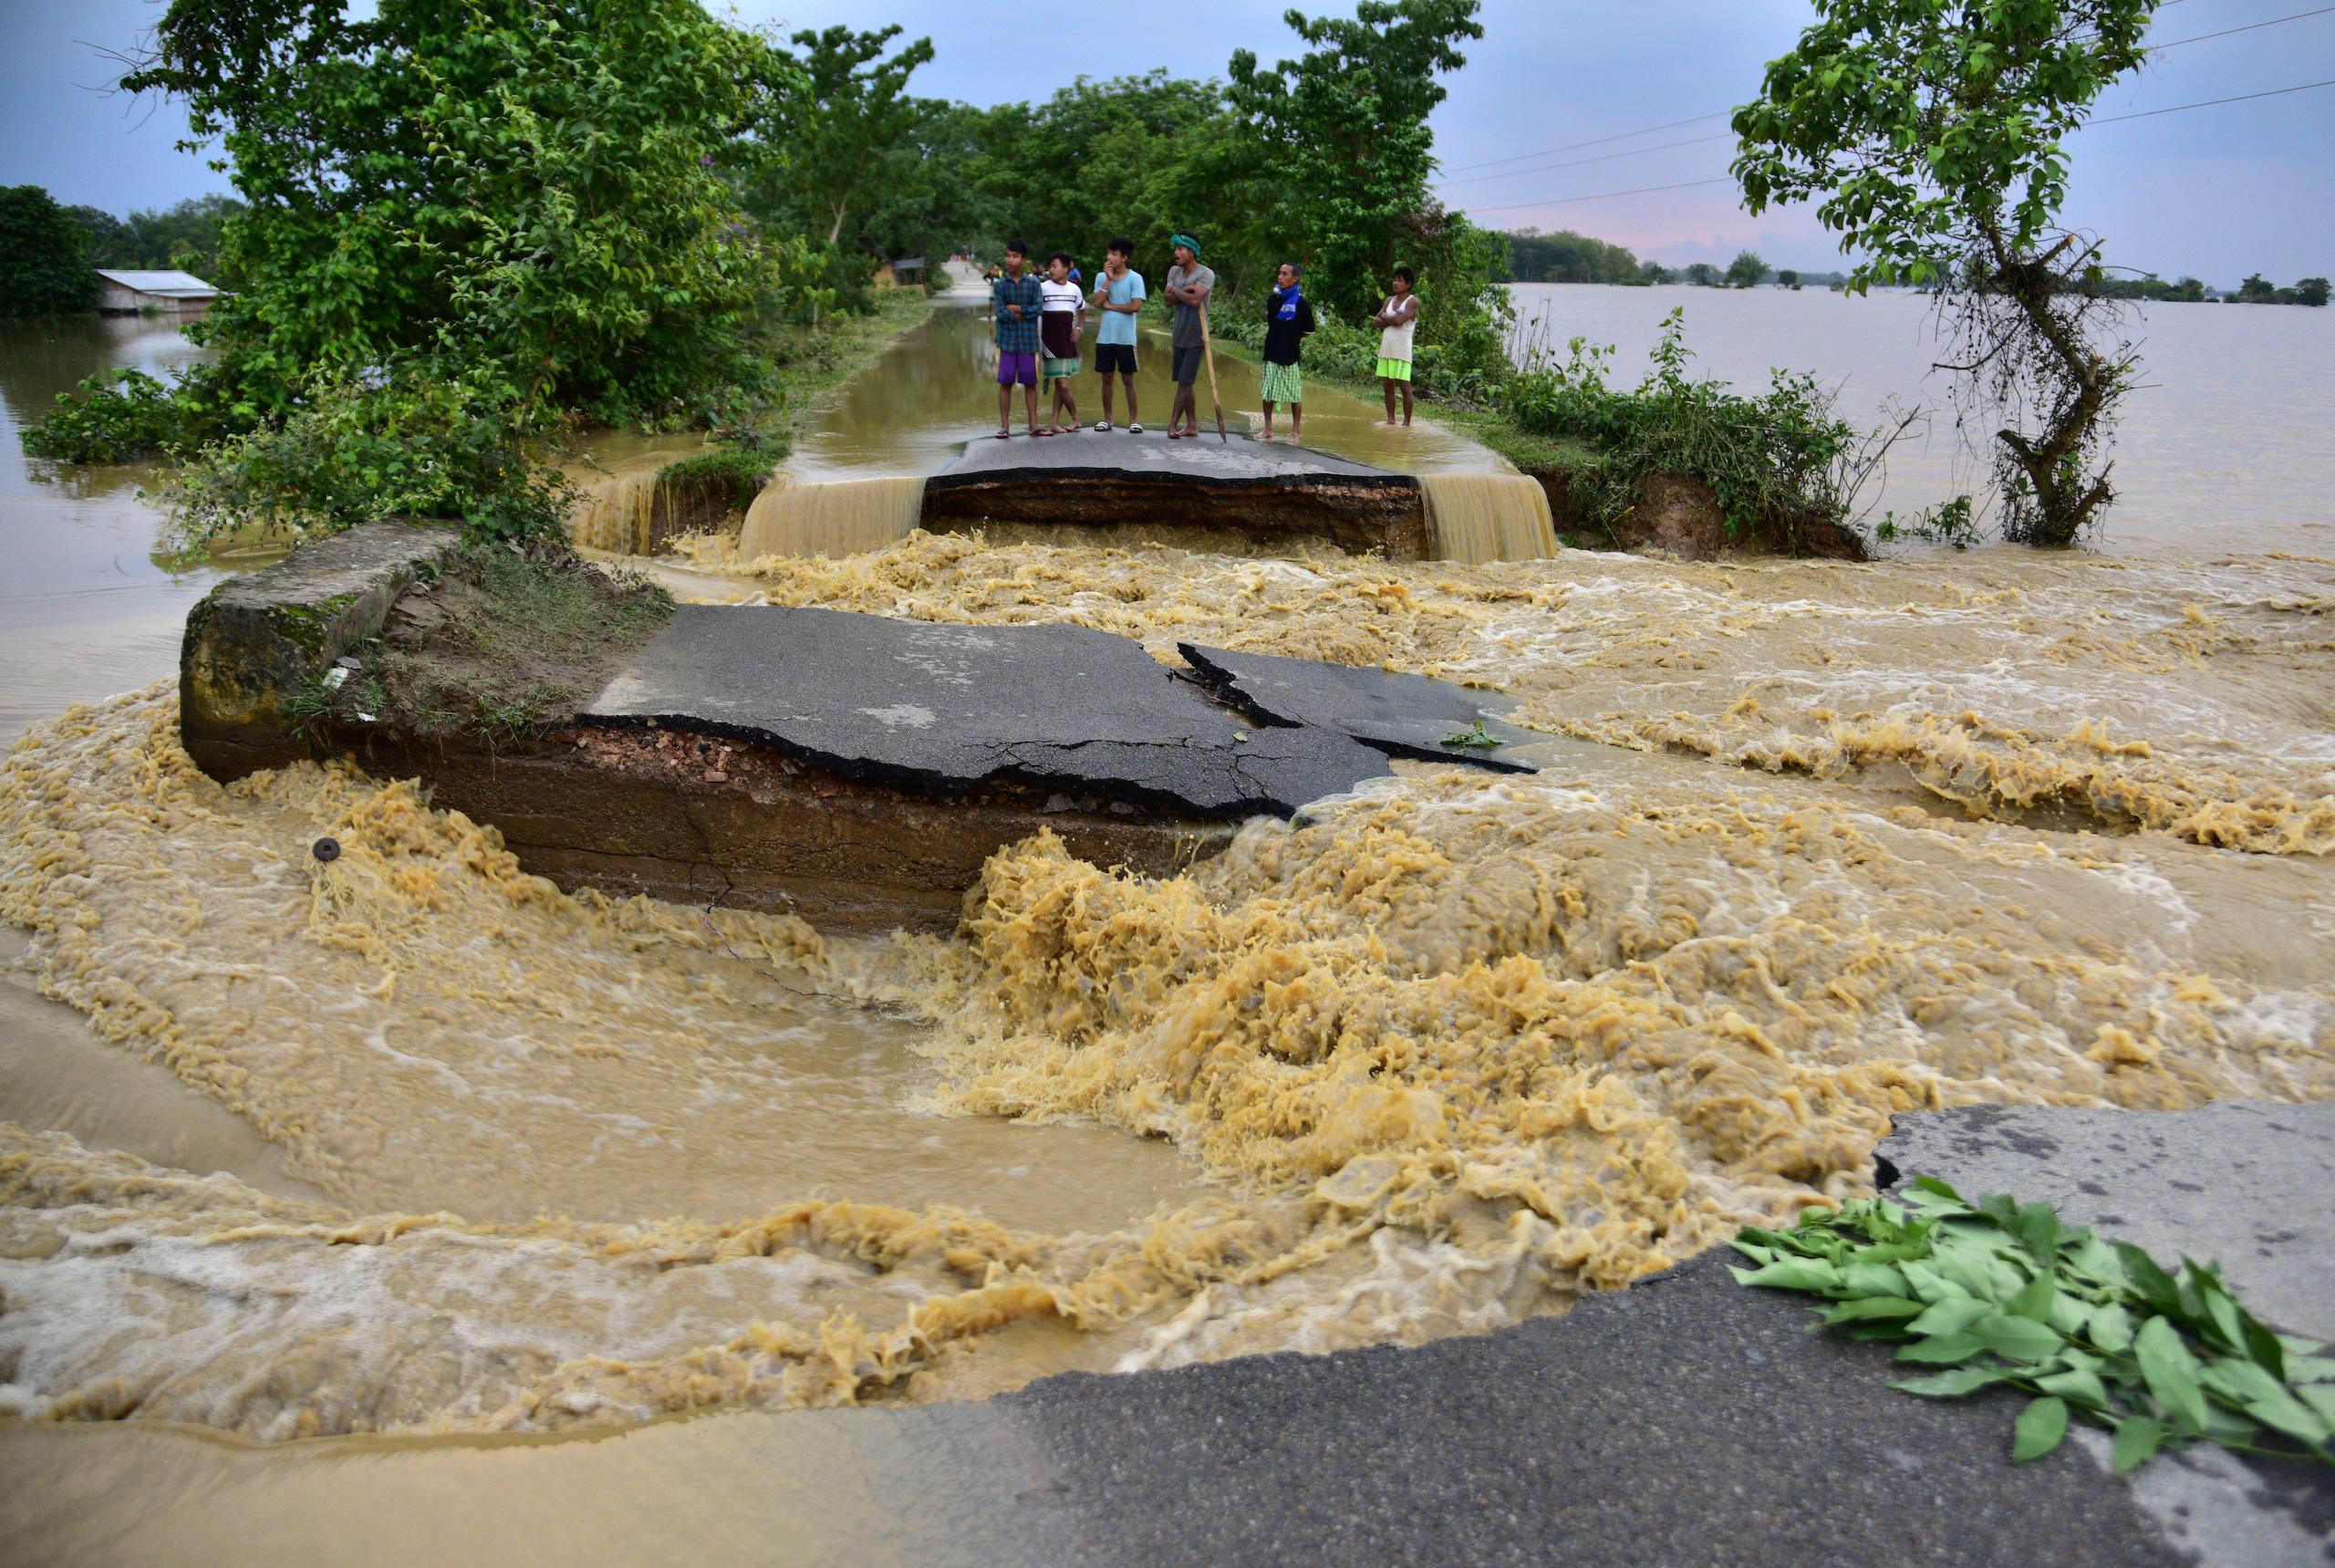 <p>People stand on a road damaged by floodwaters after heavy rains in Nagaon district, Assam, on 19 May 2022. The twin crises of extreme heat and floods are exposing a lack of preparation and shoddy infrastructure in India and Bangladesh. (Image: Anuwar Hazarika / Alamy)</p>